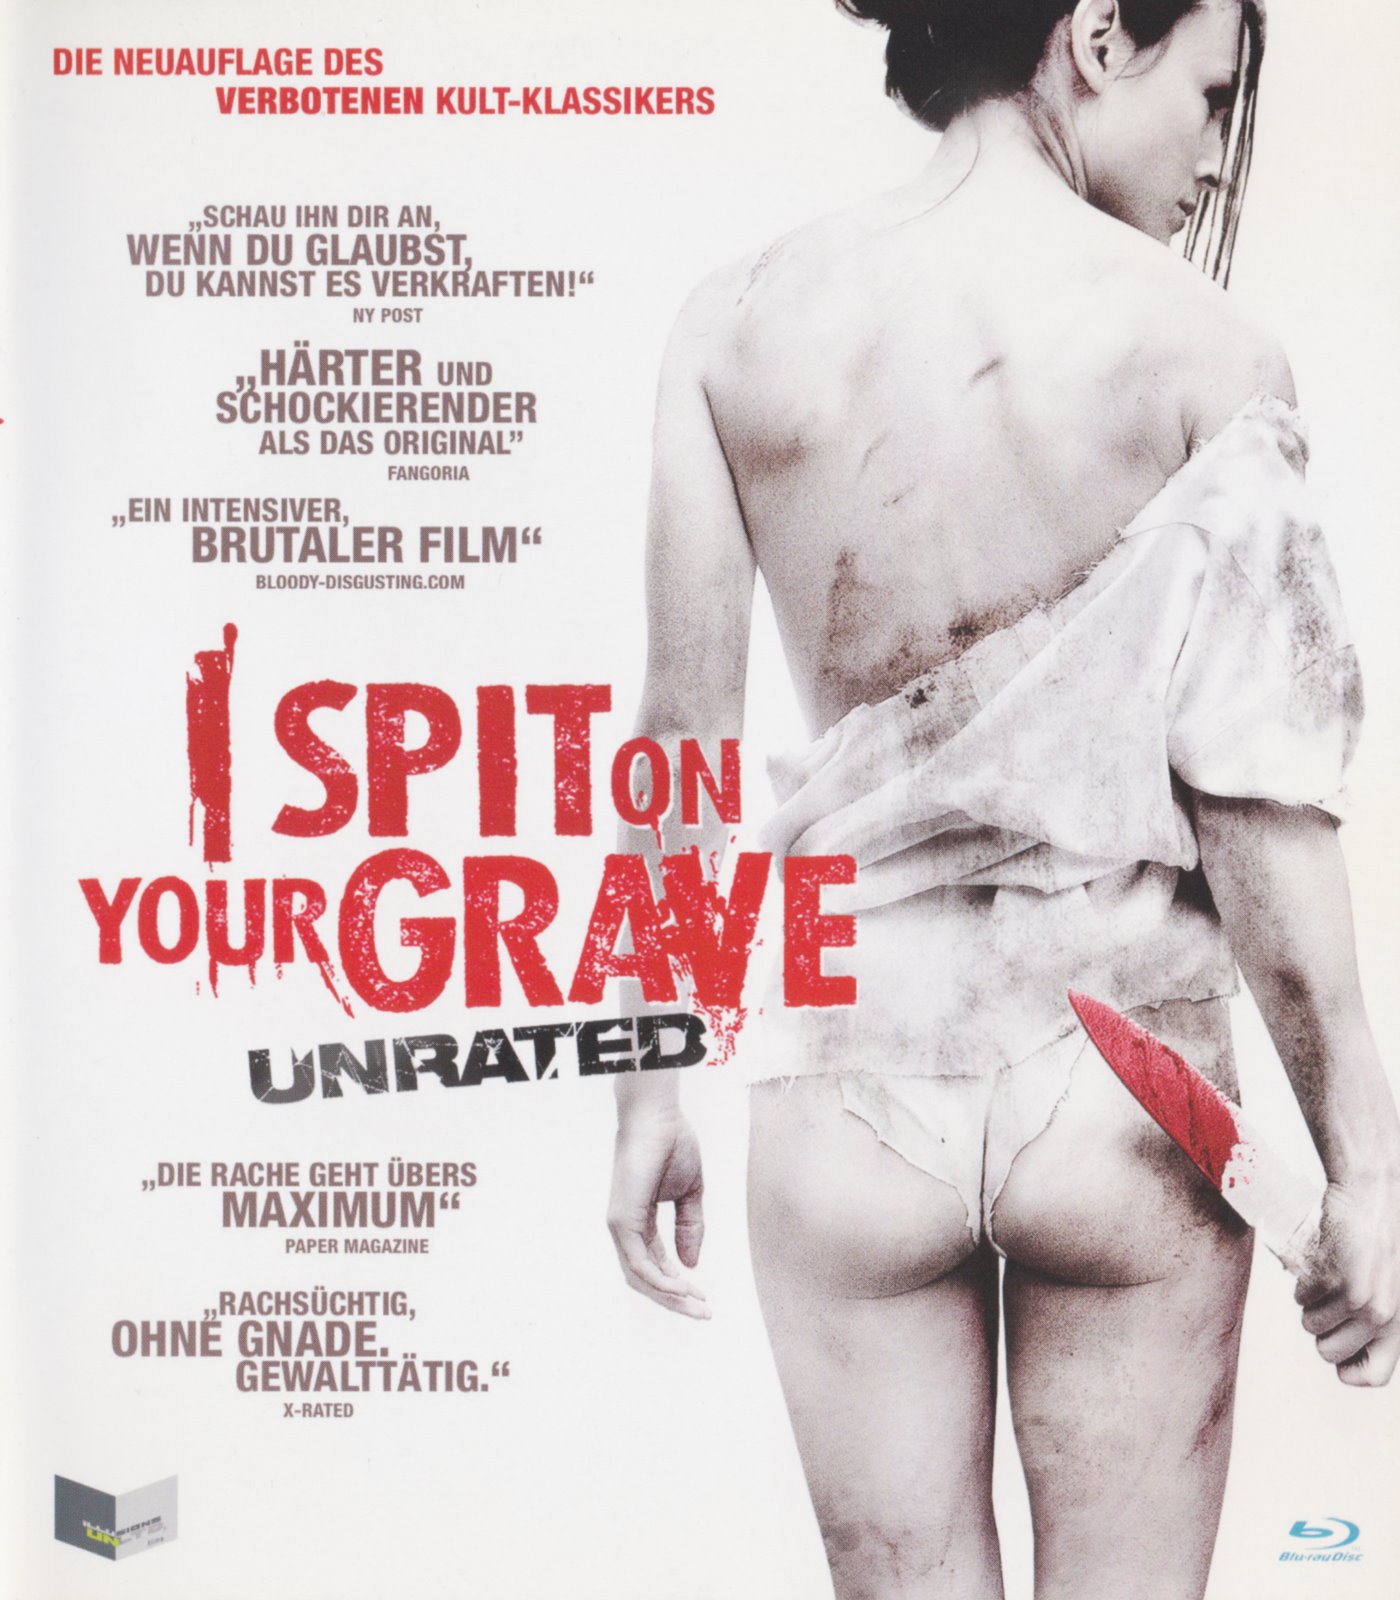 Cover - I Spit on Your Grave.jpg